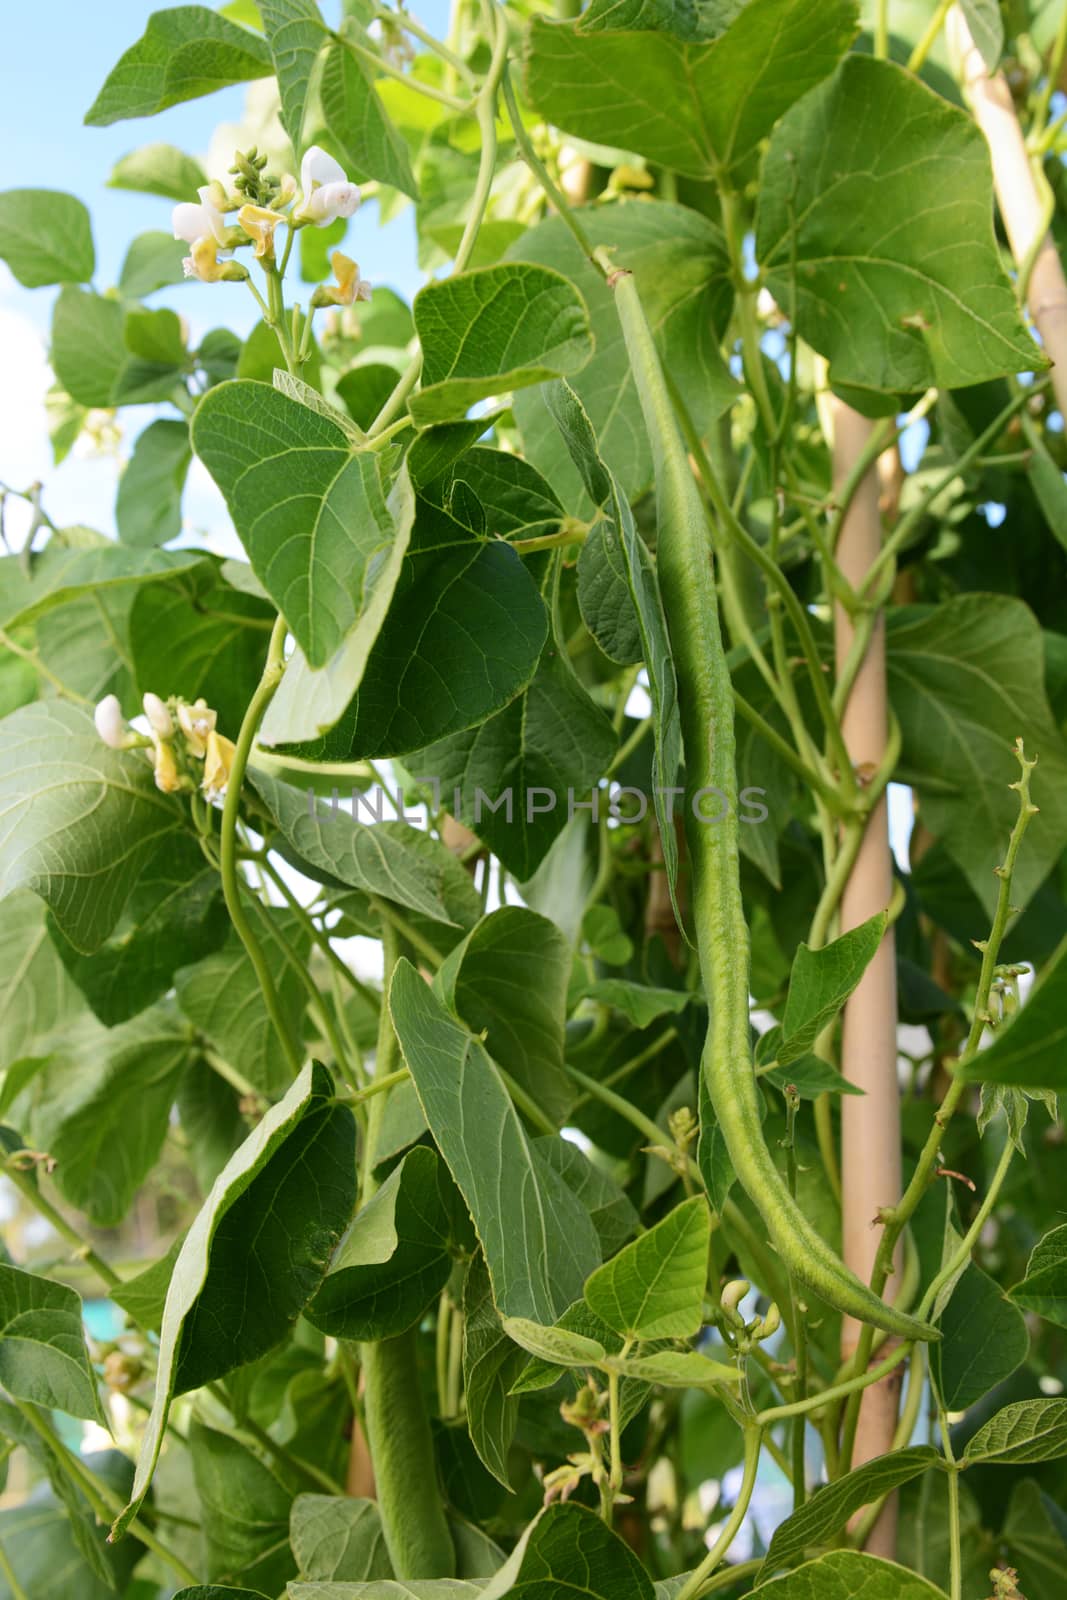 Long runner bean among lush foliage and white flowers by sarahdoow